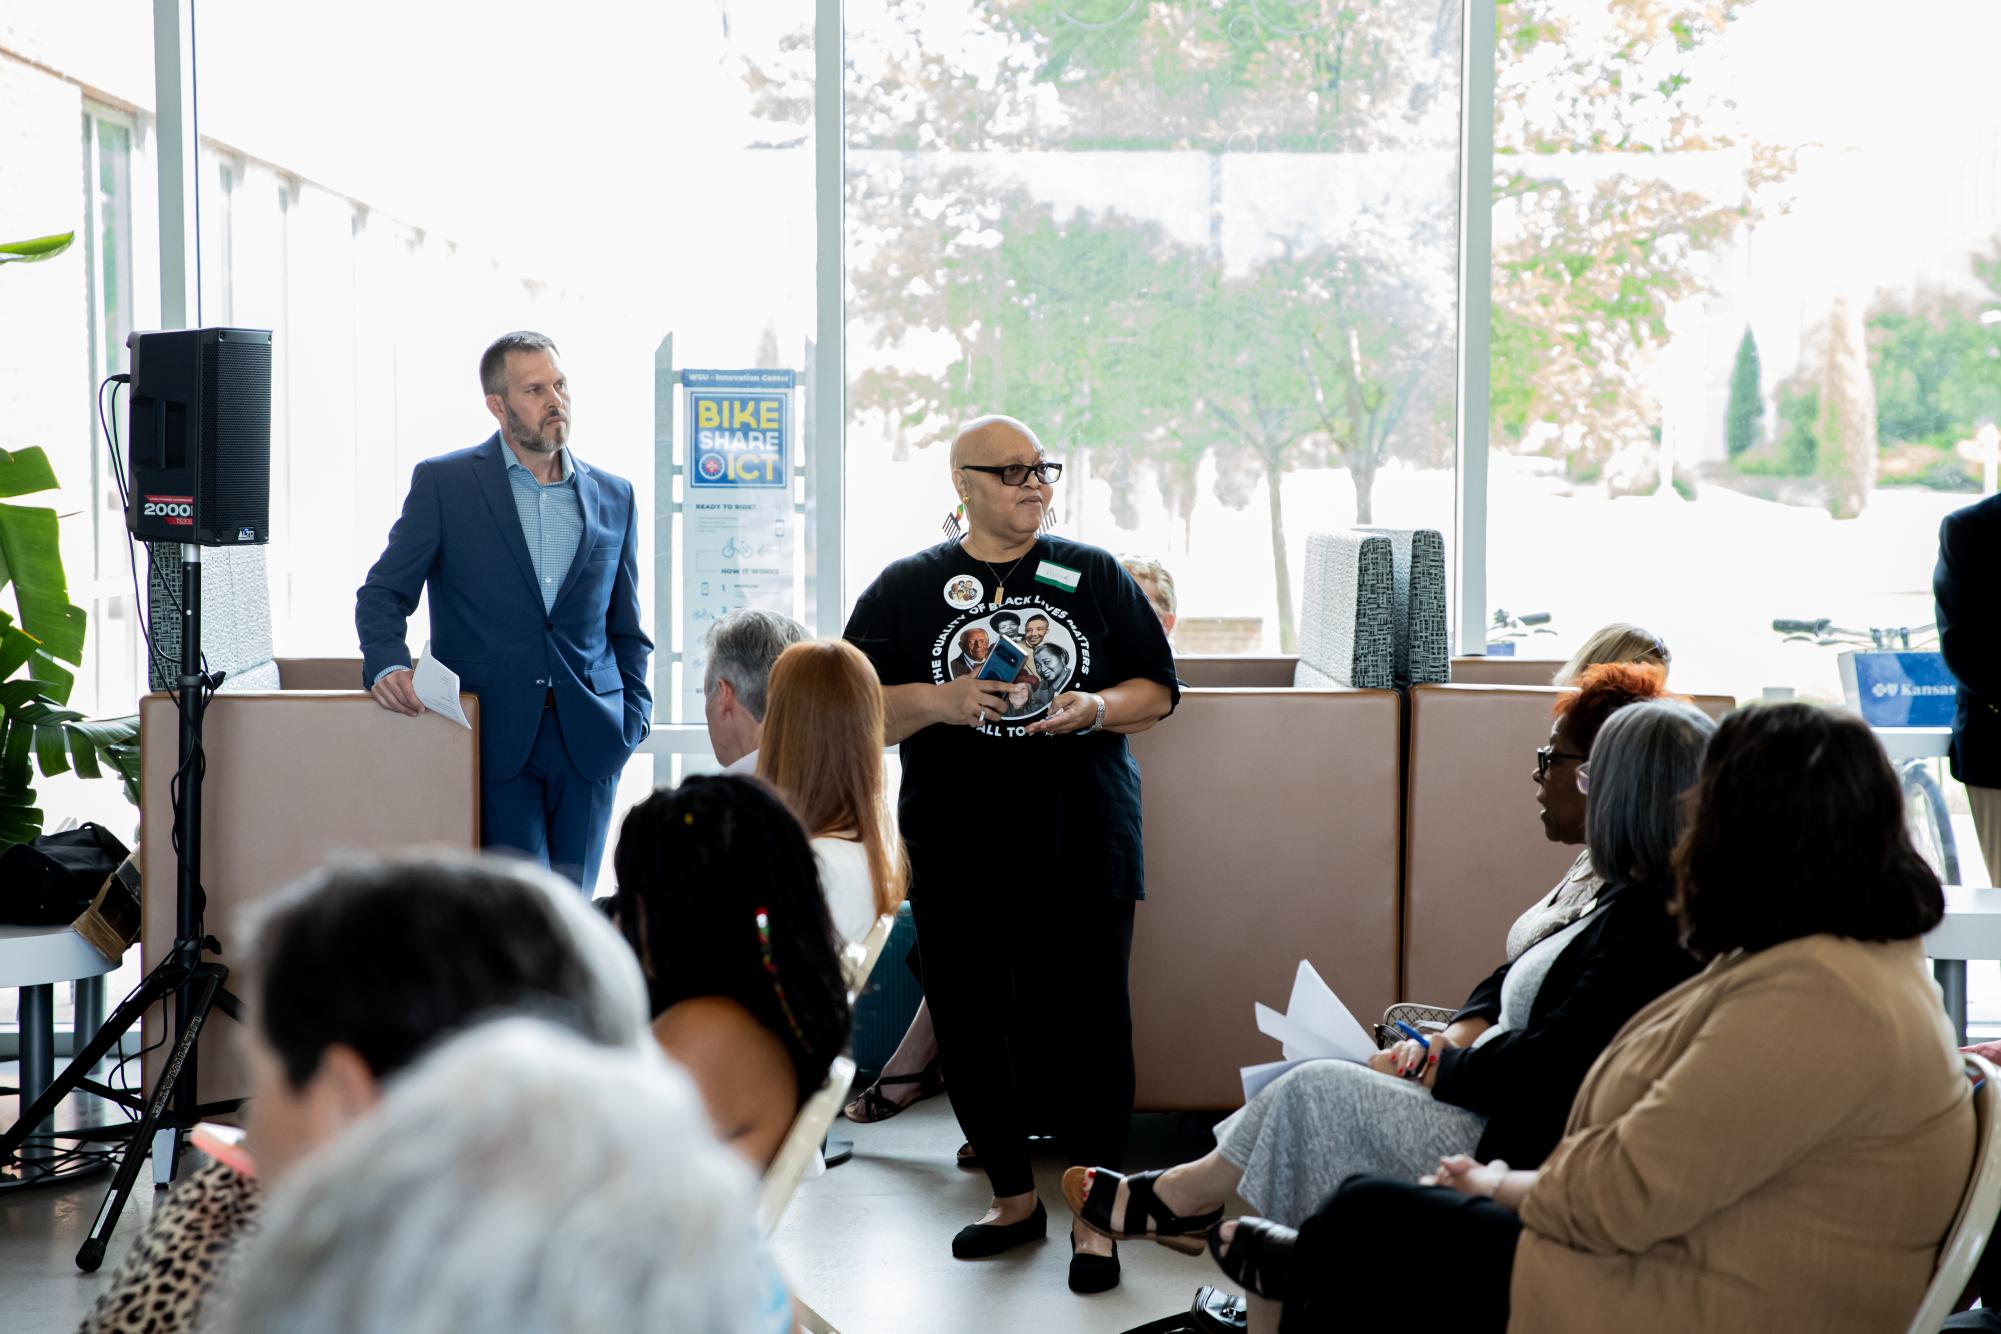 Mary Dean, president of Black Women Empowered in Wichita, Inc., and Kansas Justice Advocate, Inc., speaks out an event about the new Heartland Environmental Justice Center on July 12. Dean talked about the lack of representation of and discussion with the Black community.